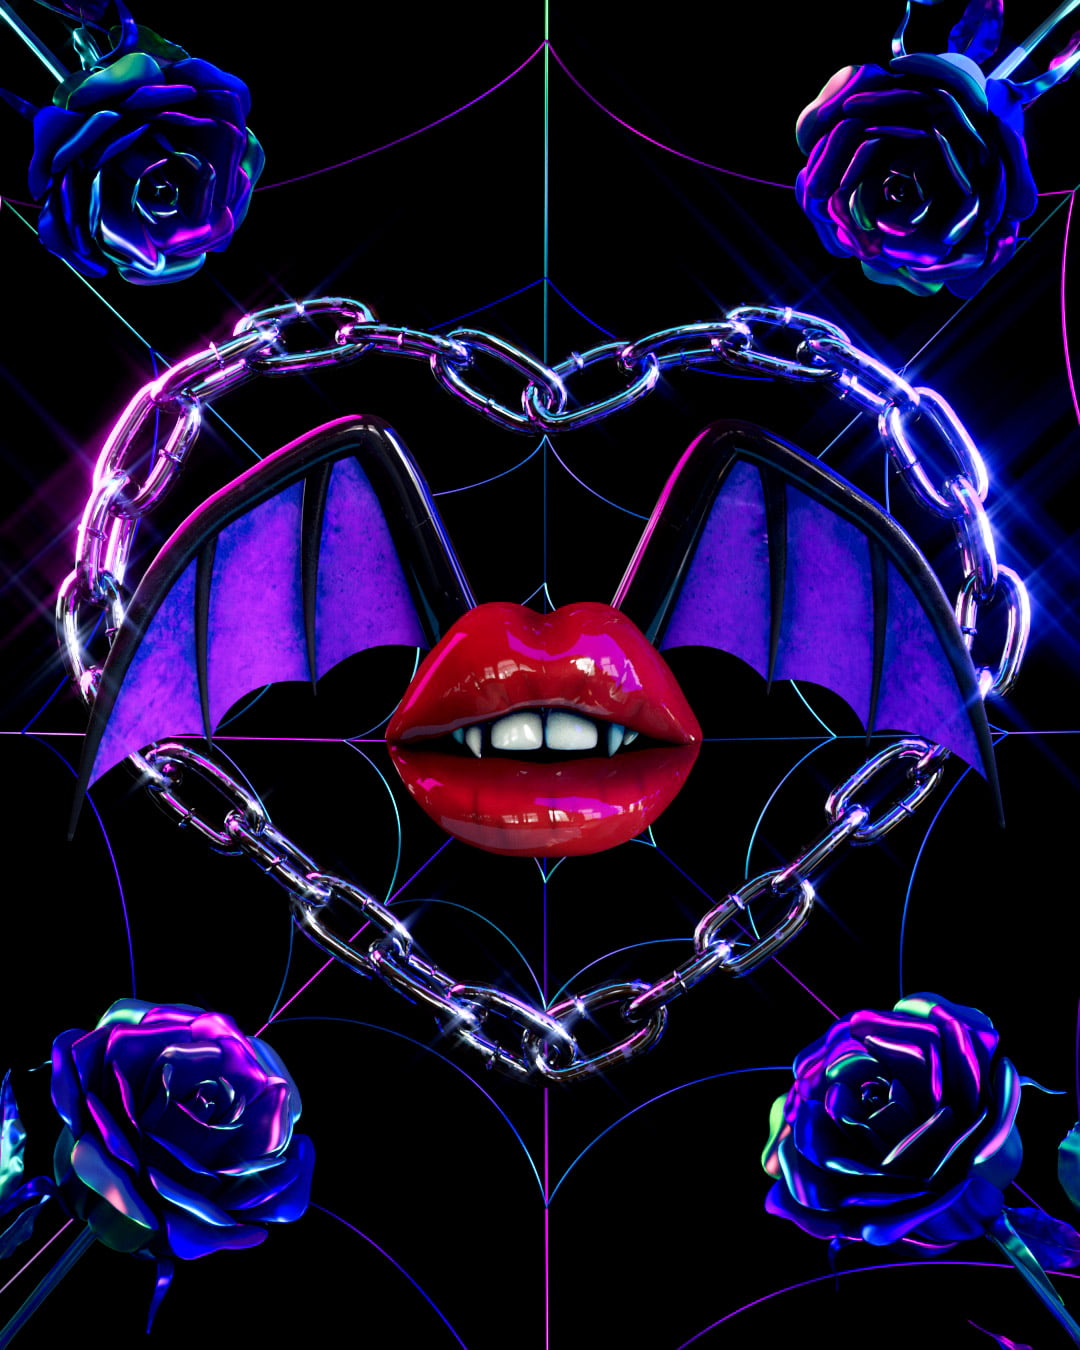 Black background with iridescent spiderweb filling the space. Metallic iridescent blue/magenta roses on all corners. A silver heart shaped chain in the center framing juicy red lipstick lips with fangs and black and purple webbed bat wings.